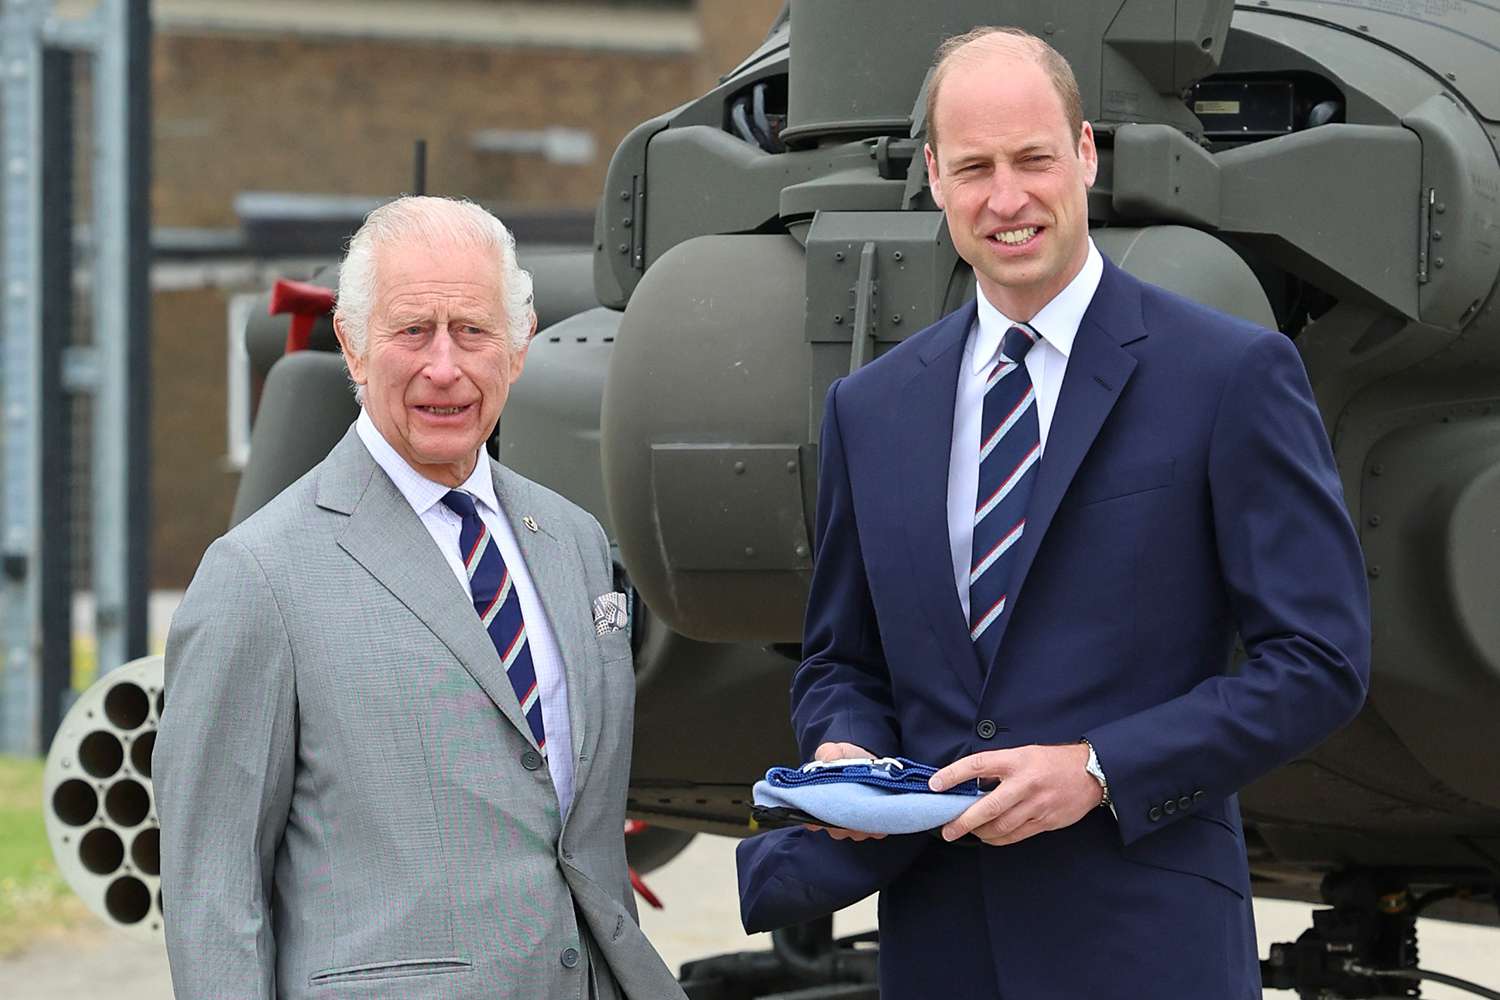 King Charles Appoints Prince William to Military Role Linked to Prince Harry in Controversial Move